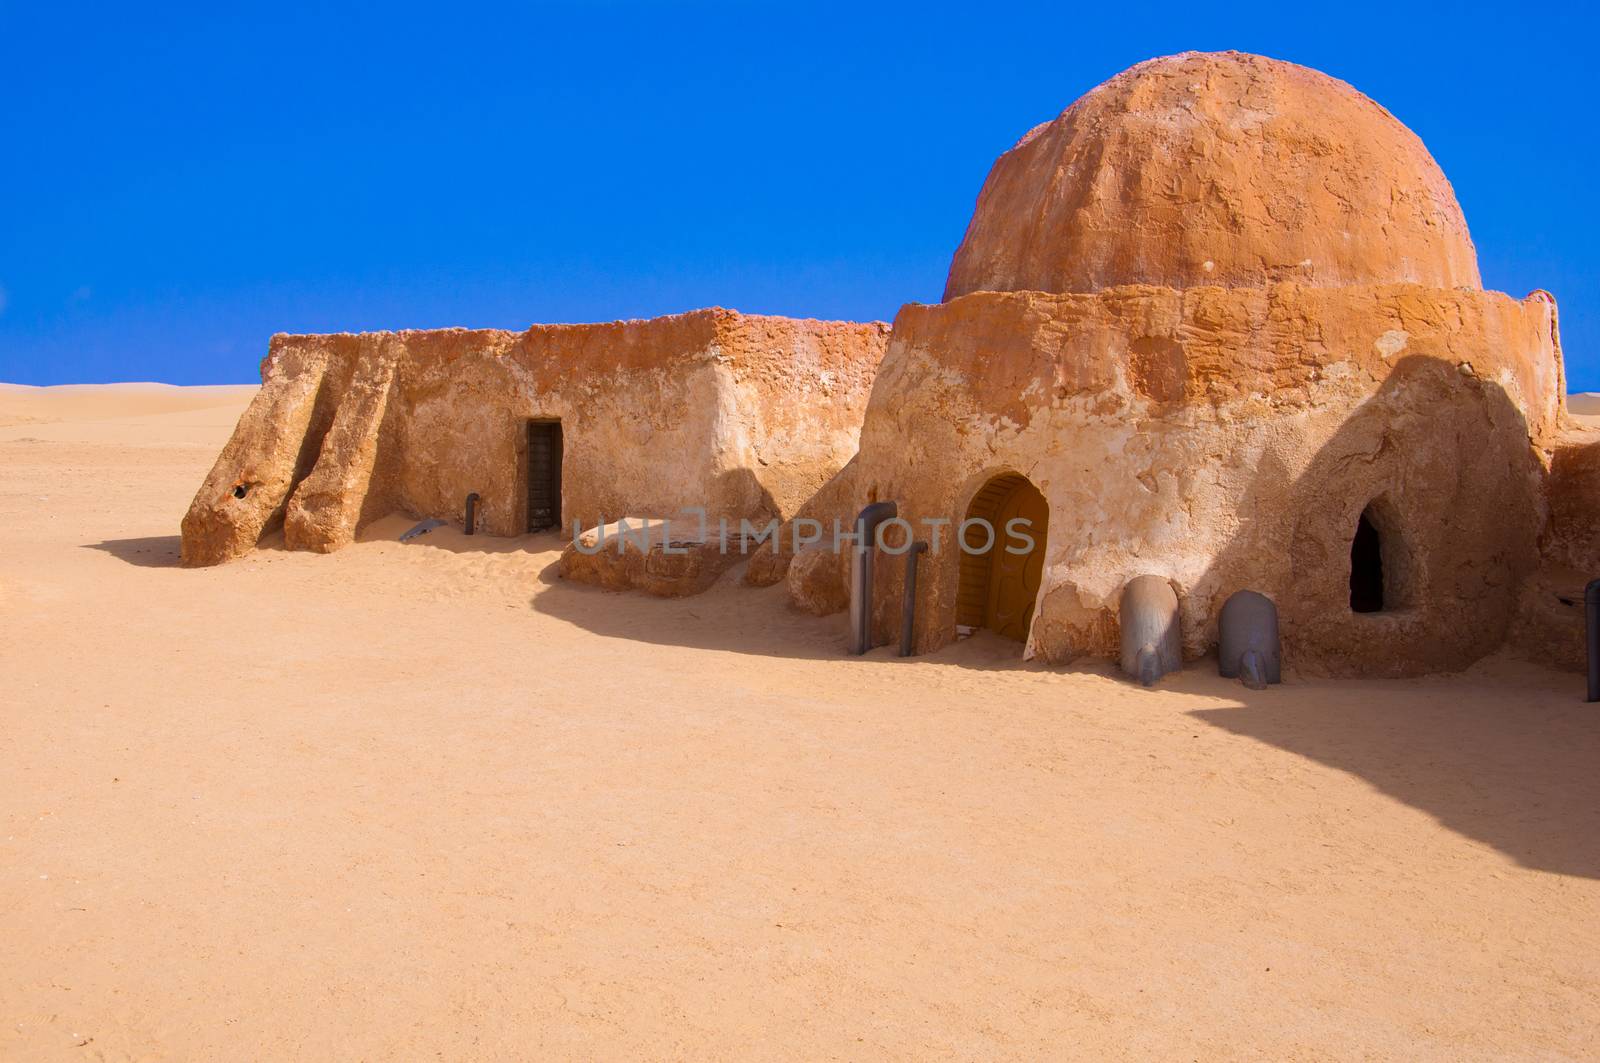 Star wars abandoned film set in Tunisia by lakiluciano